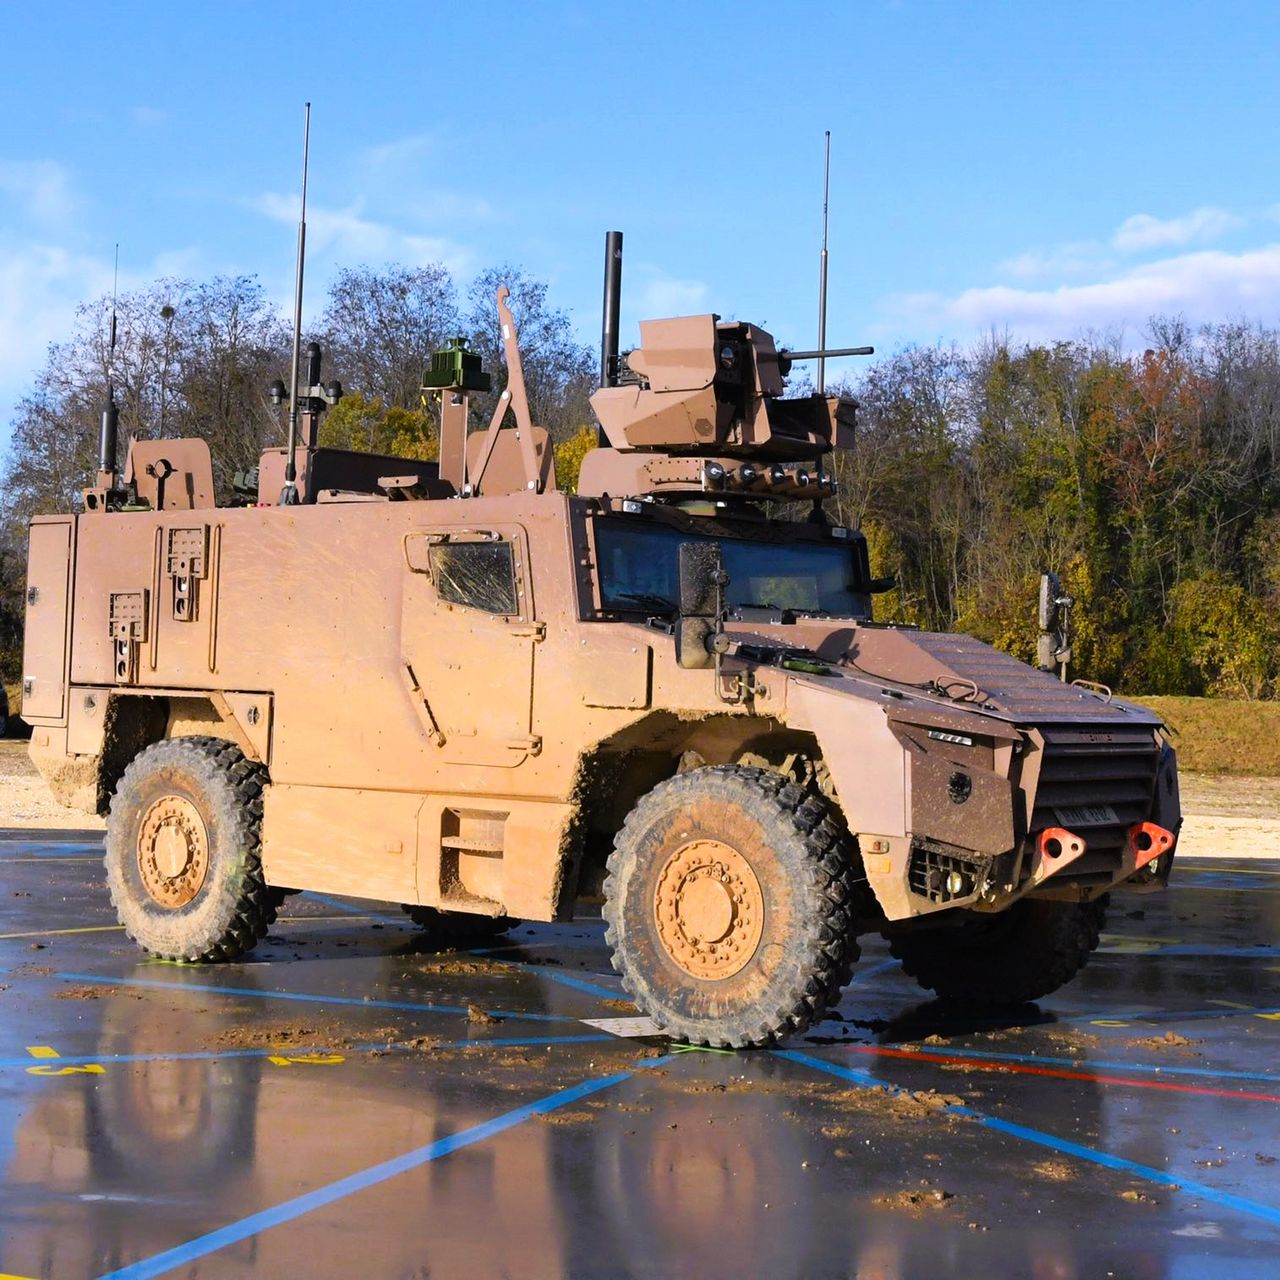 Brussels considered the Servals as successors to the 437 light multi-purpose vehicles Iveco LMV Lynx. Ultimately, it was decided to opt for the American JLTV.